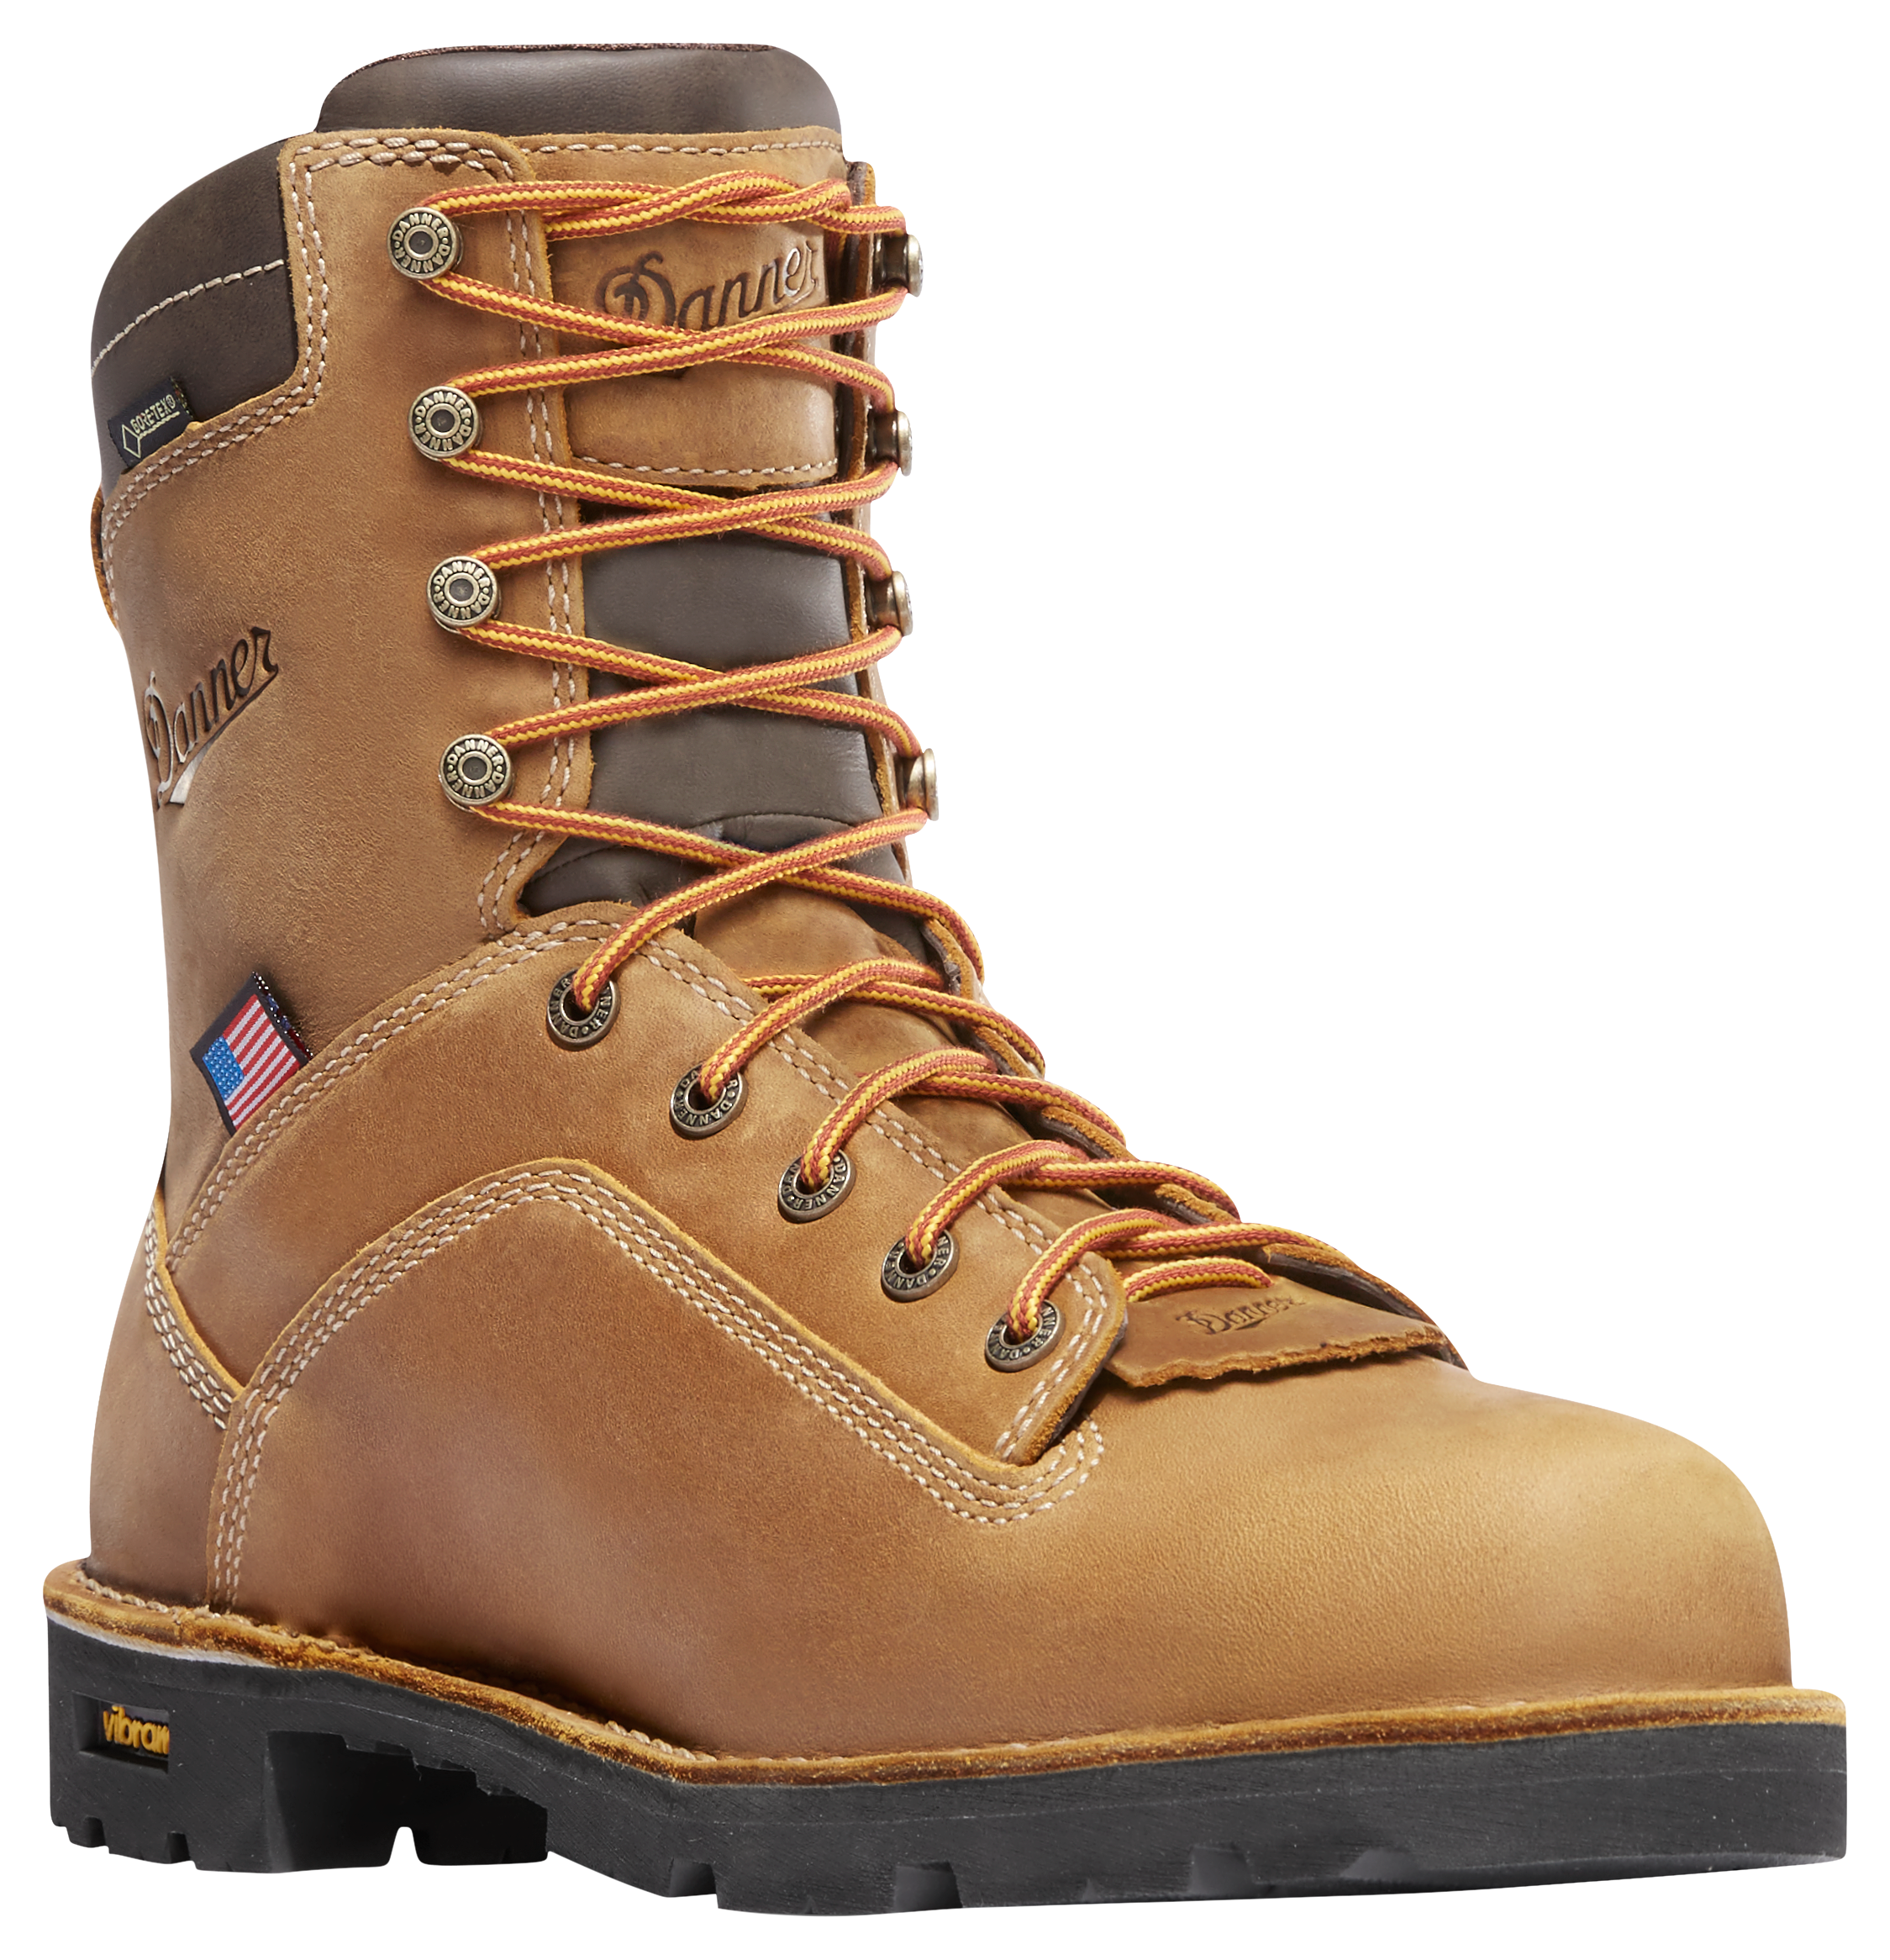 Danner Quarry USA GORE-TEX Alloy Toe Work Boots for Men